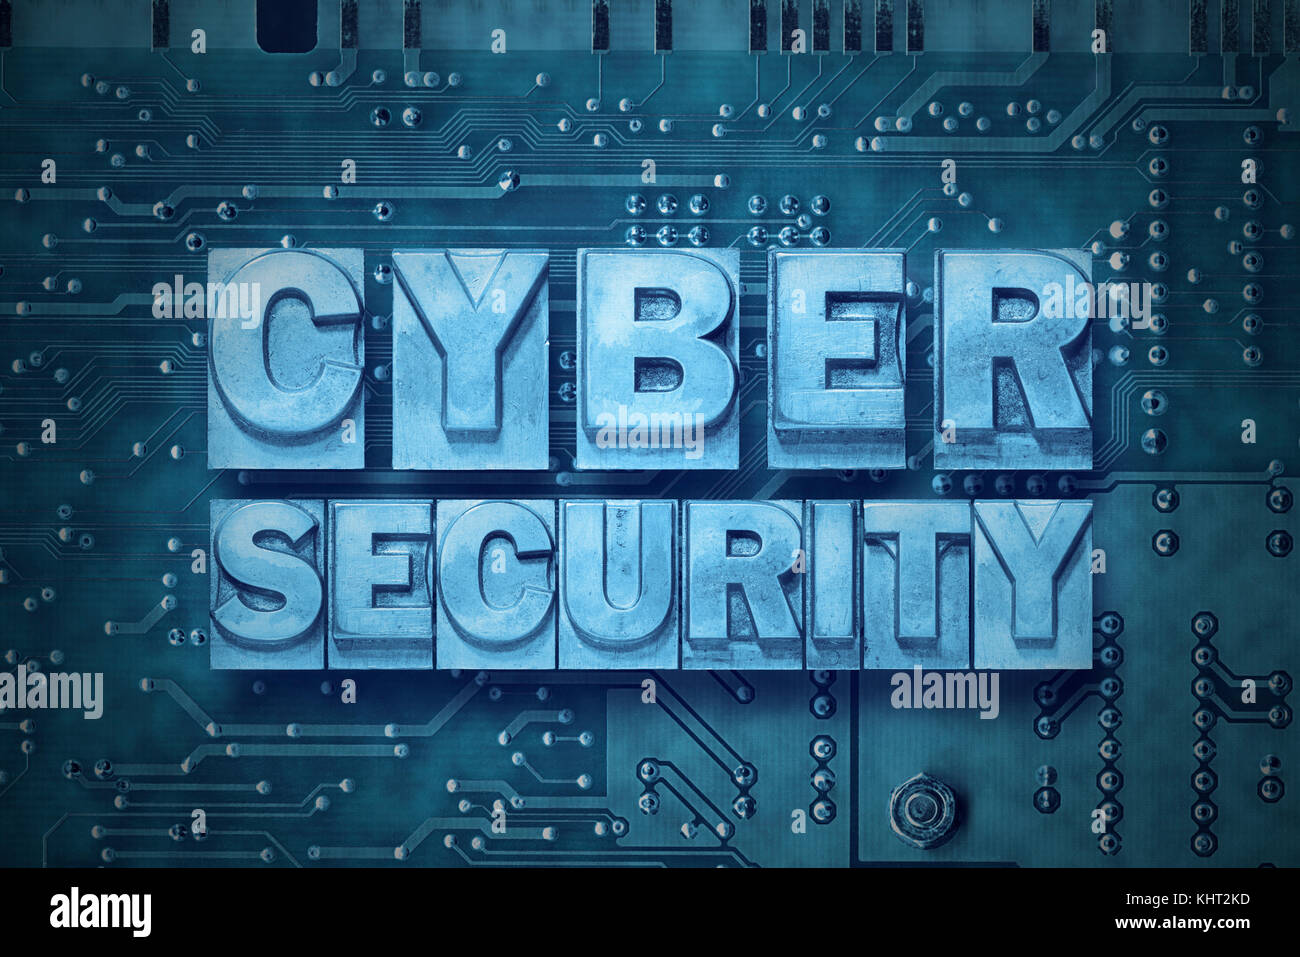 cyber security phrase made from metallic letterpress blocks on the pc board background Stock Photo